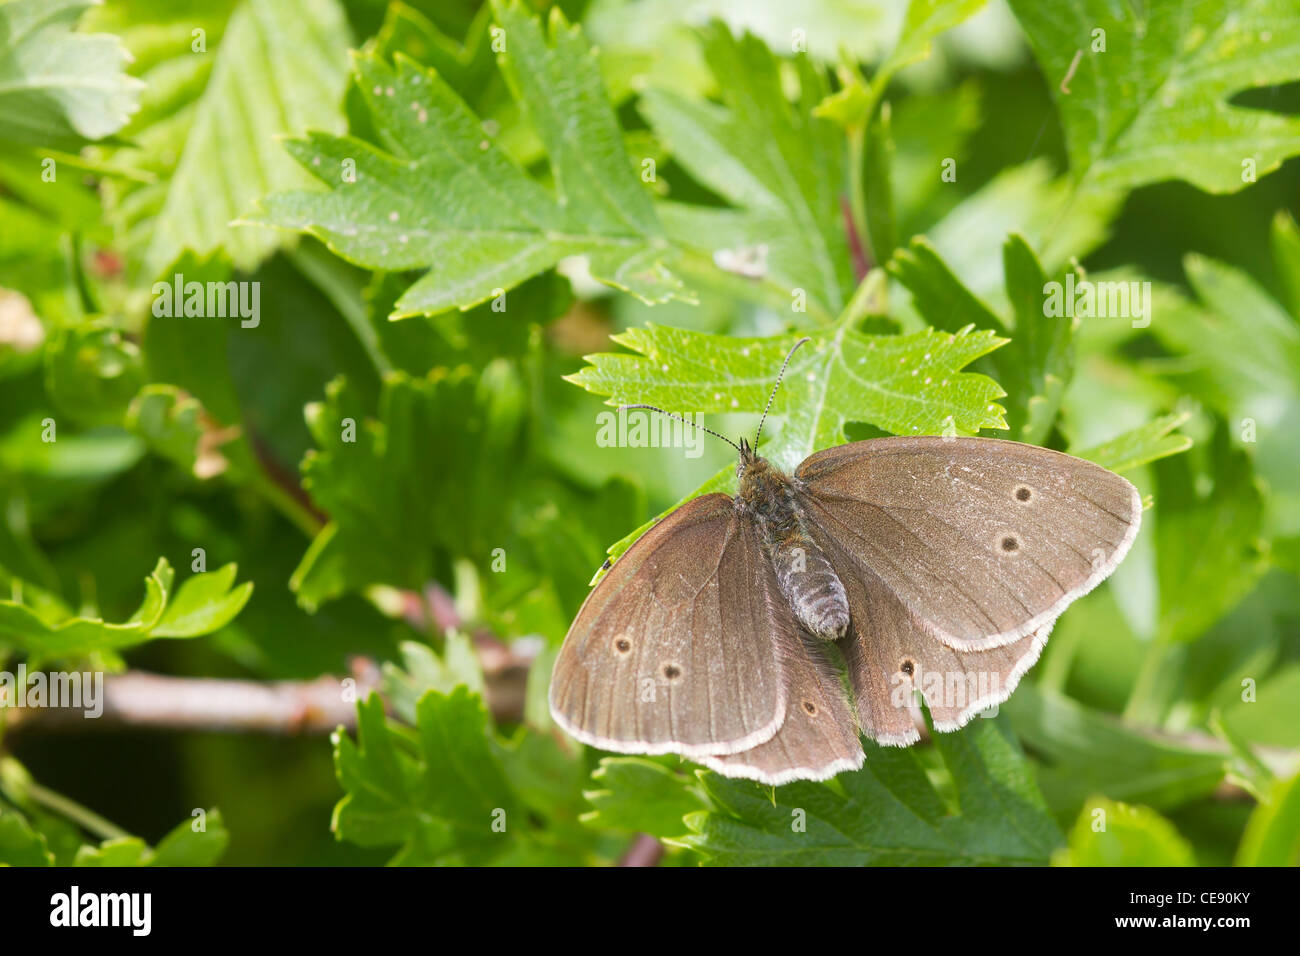 Ringlet butterfly (Aphantopus hyperanthus) perched on a leaf Stock Photo